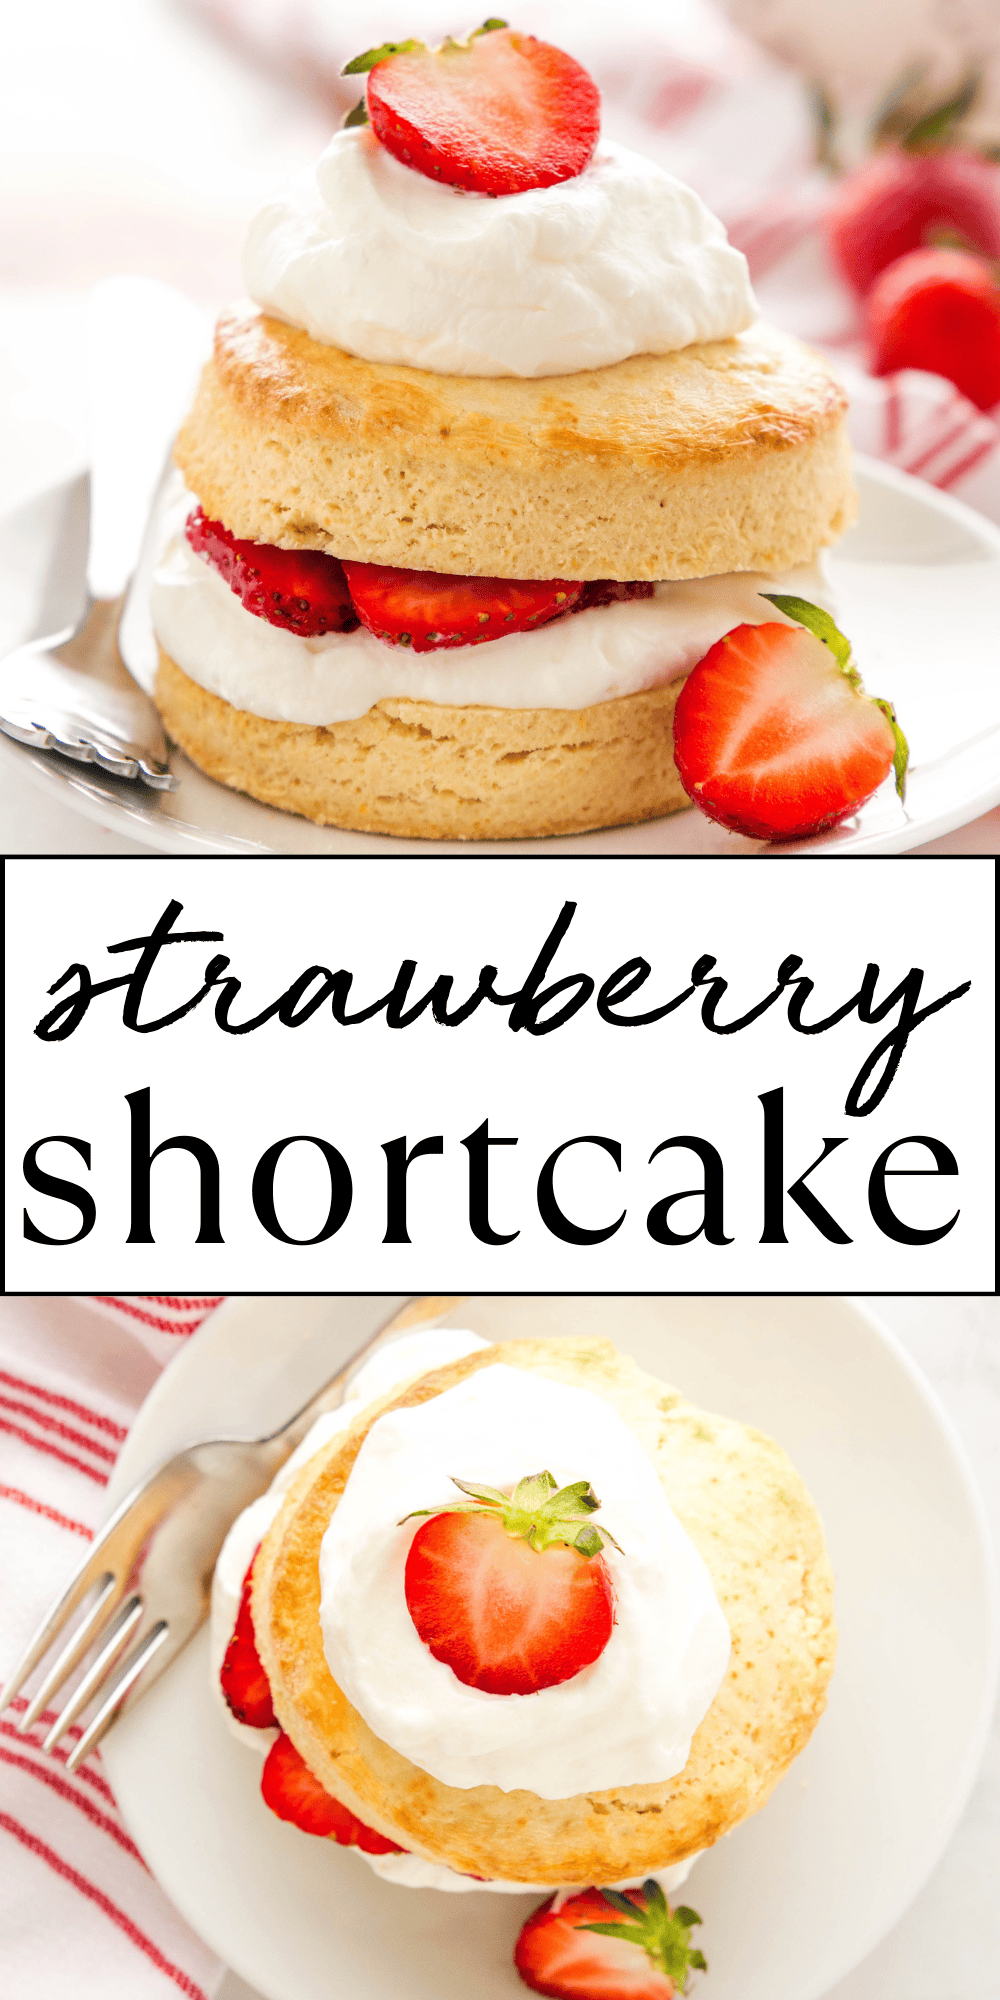 This Strawberry Shortcake recipe is a classic dessert made with a simple homemade moist and fluffy shortcake, sliced macerated strawberries, and whipped cream. Recipe from thebusybaker.ca! #strawberryshortcake #shortcake #strawberrydessert #cake #dessert #strawberrycake #summerdessert via @busybakerblog